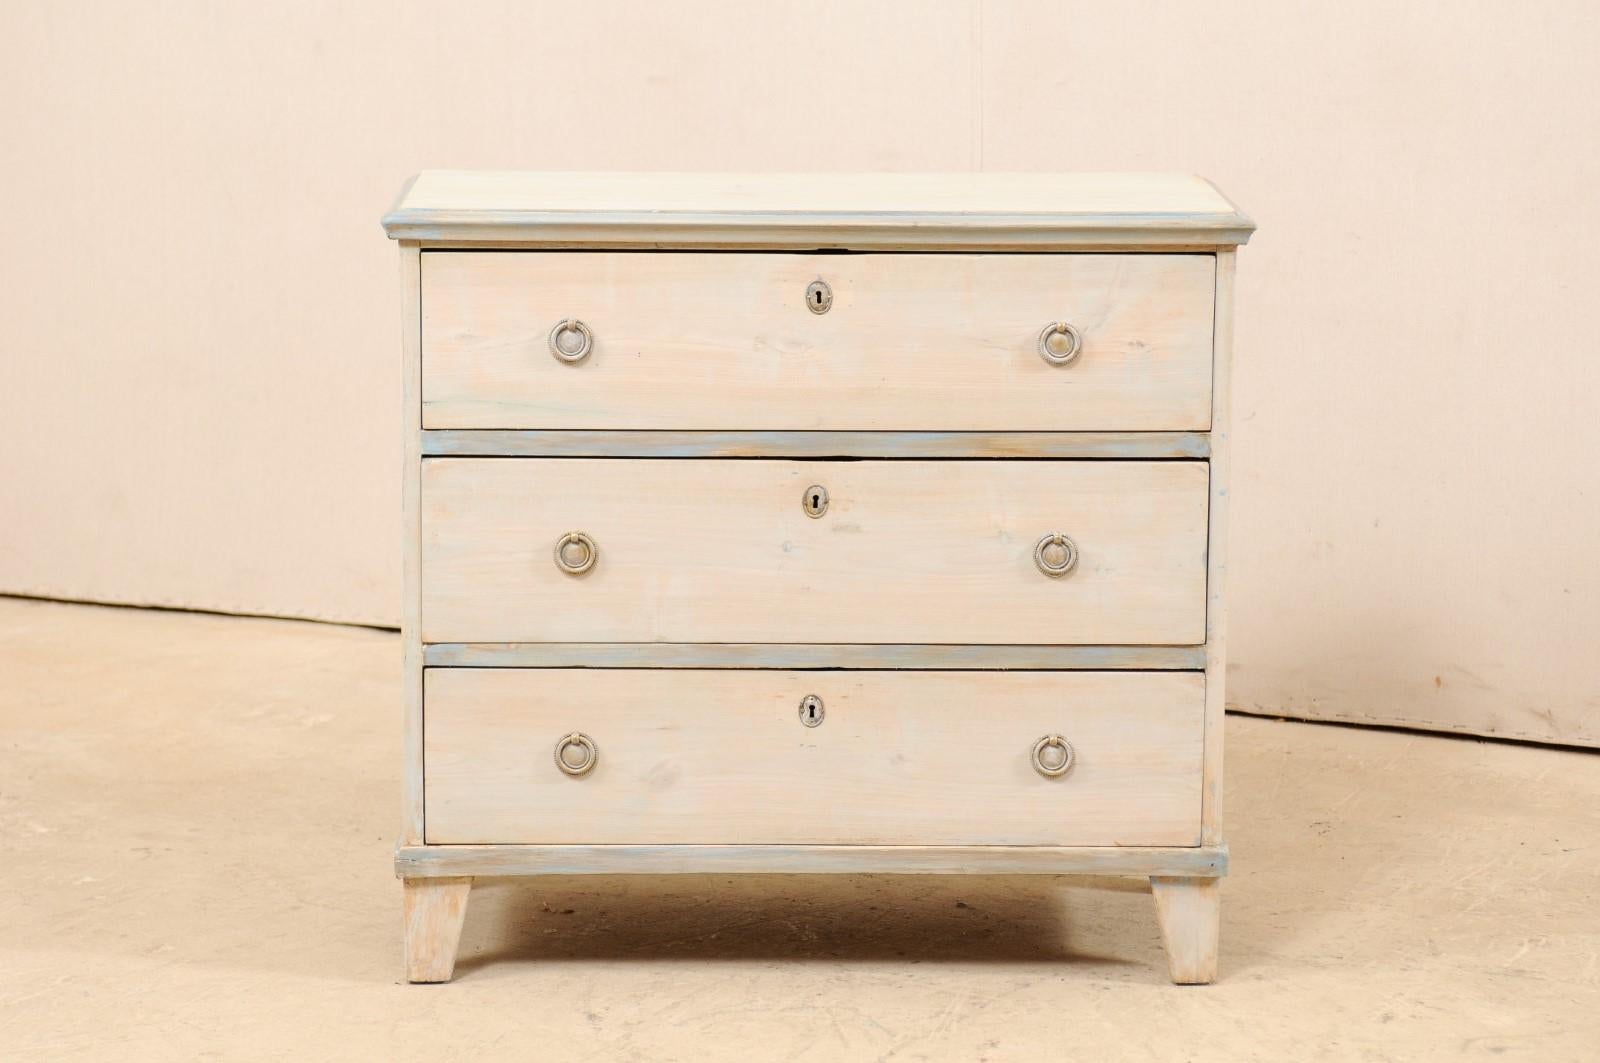 Carved Swedish Gustavian Style Painted Wood Chest in Pale Blue Hues, Mid-20th Century